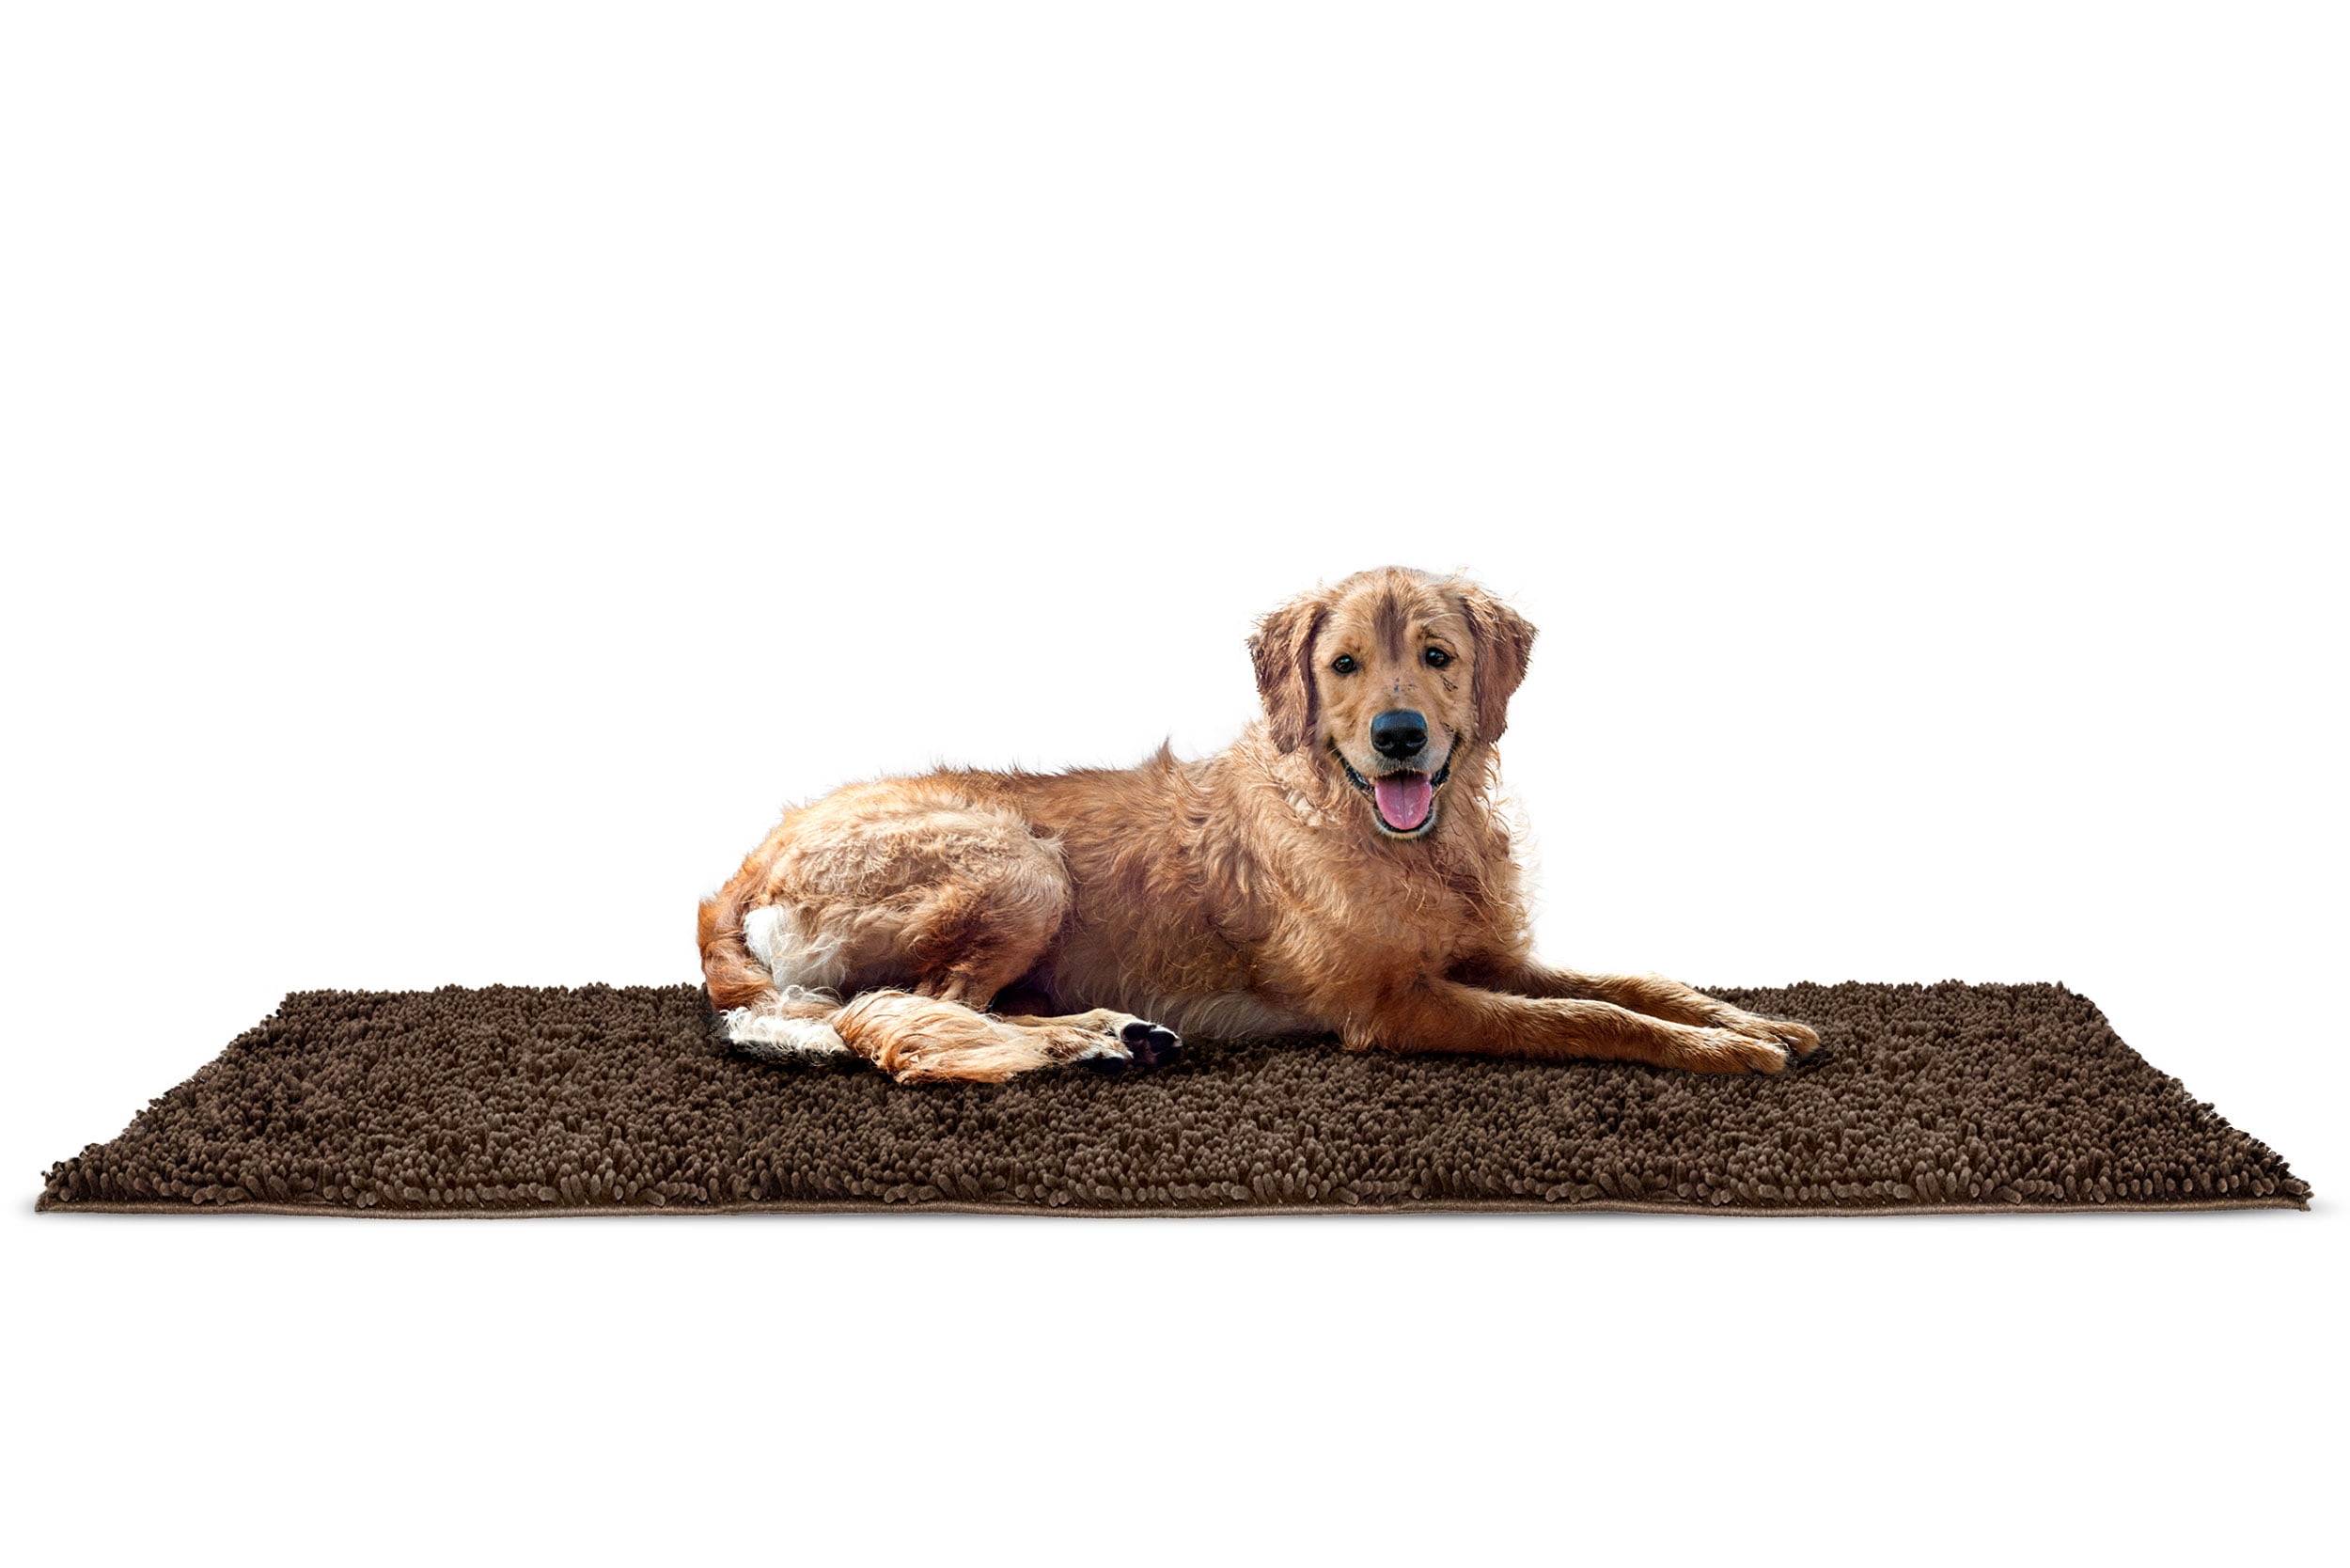 Up To 66% Off on FurHaven Absorbent Shammy Pet